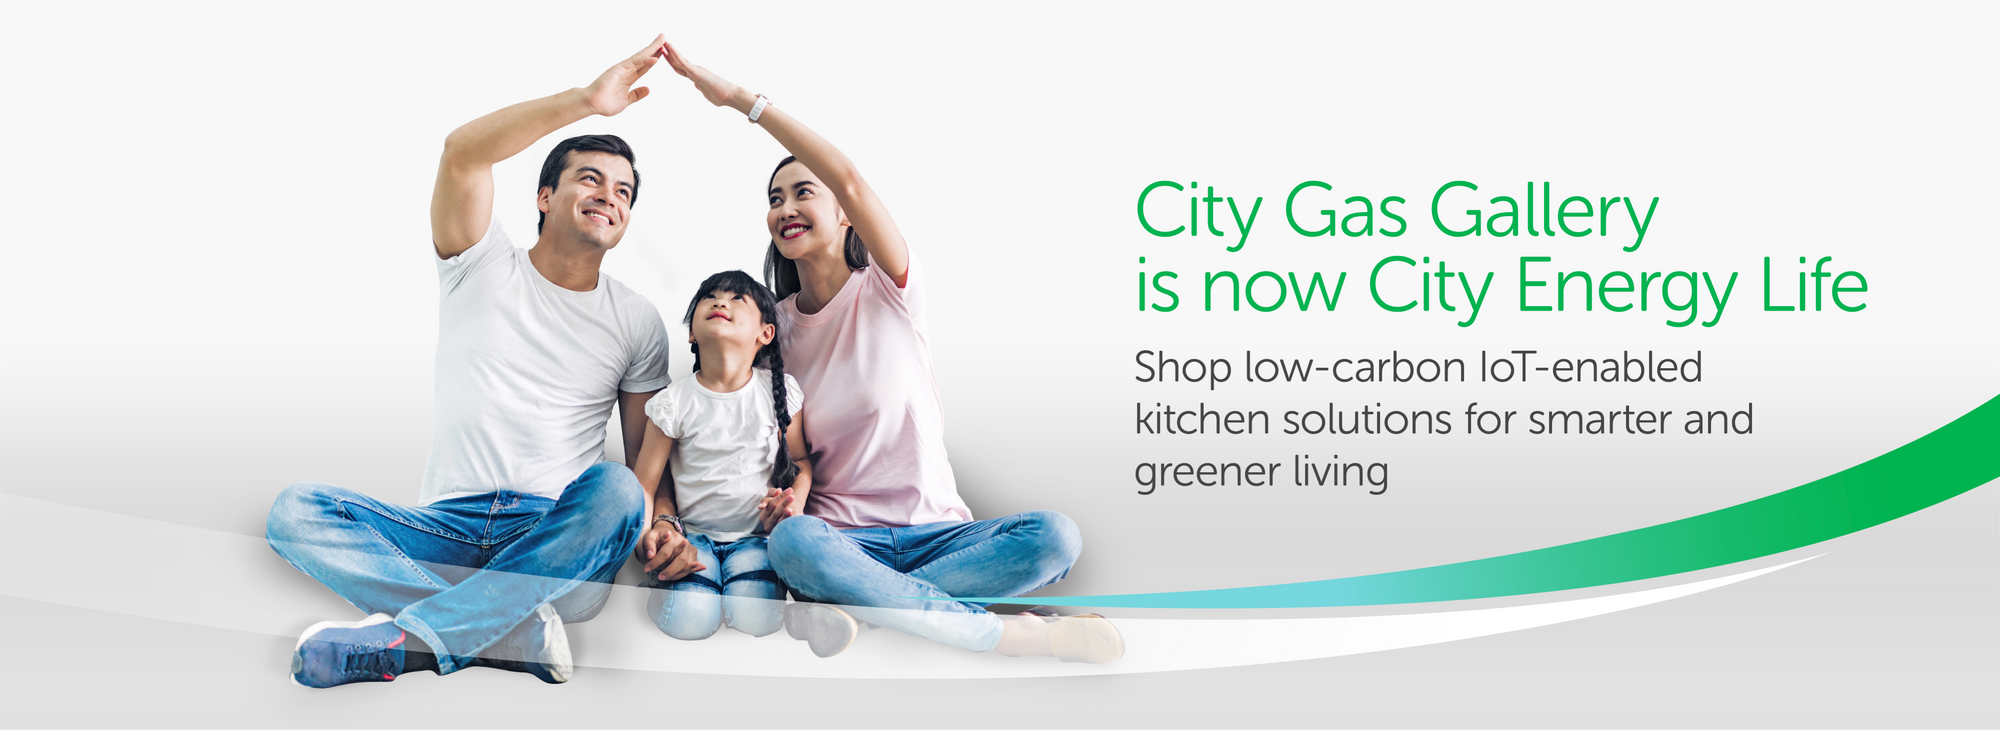 City Gas Gallery to City Energy Life